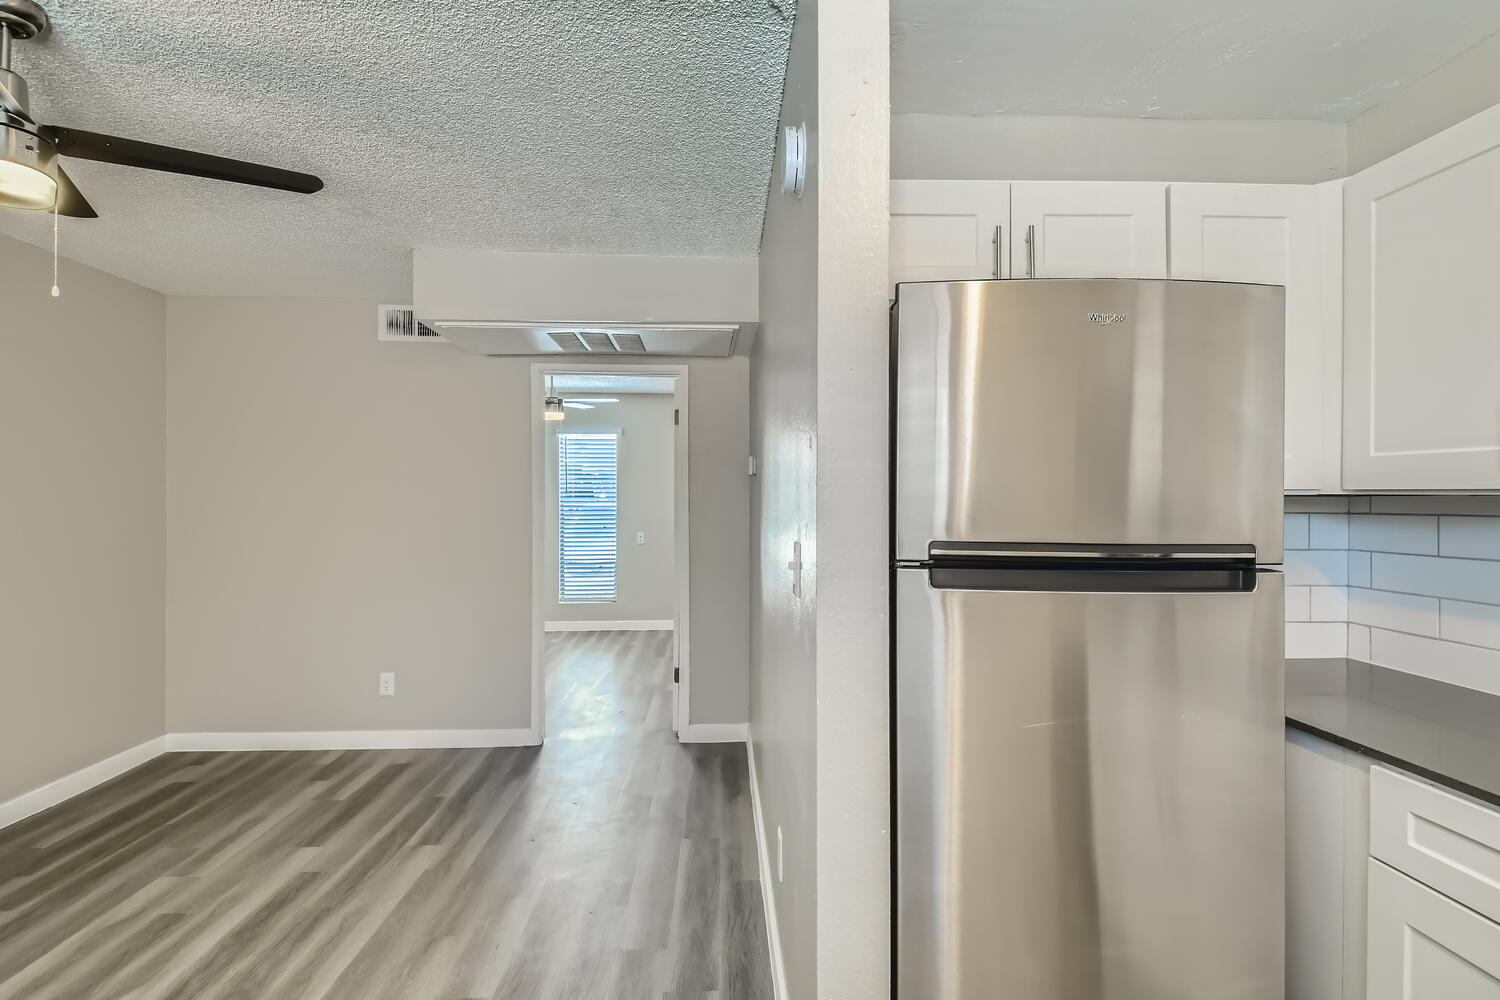 A stainless steel fridge in the kitchen and living area at Rise at the Palms.